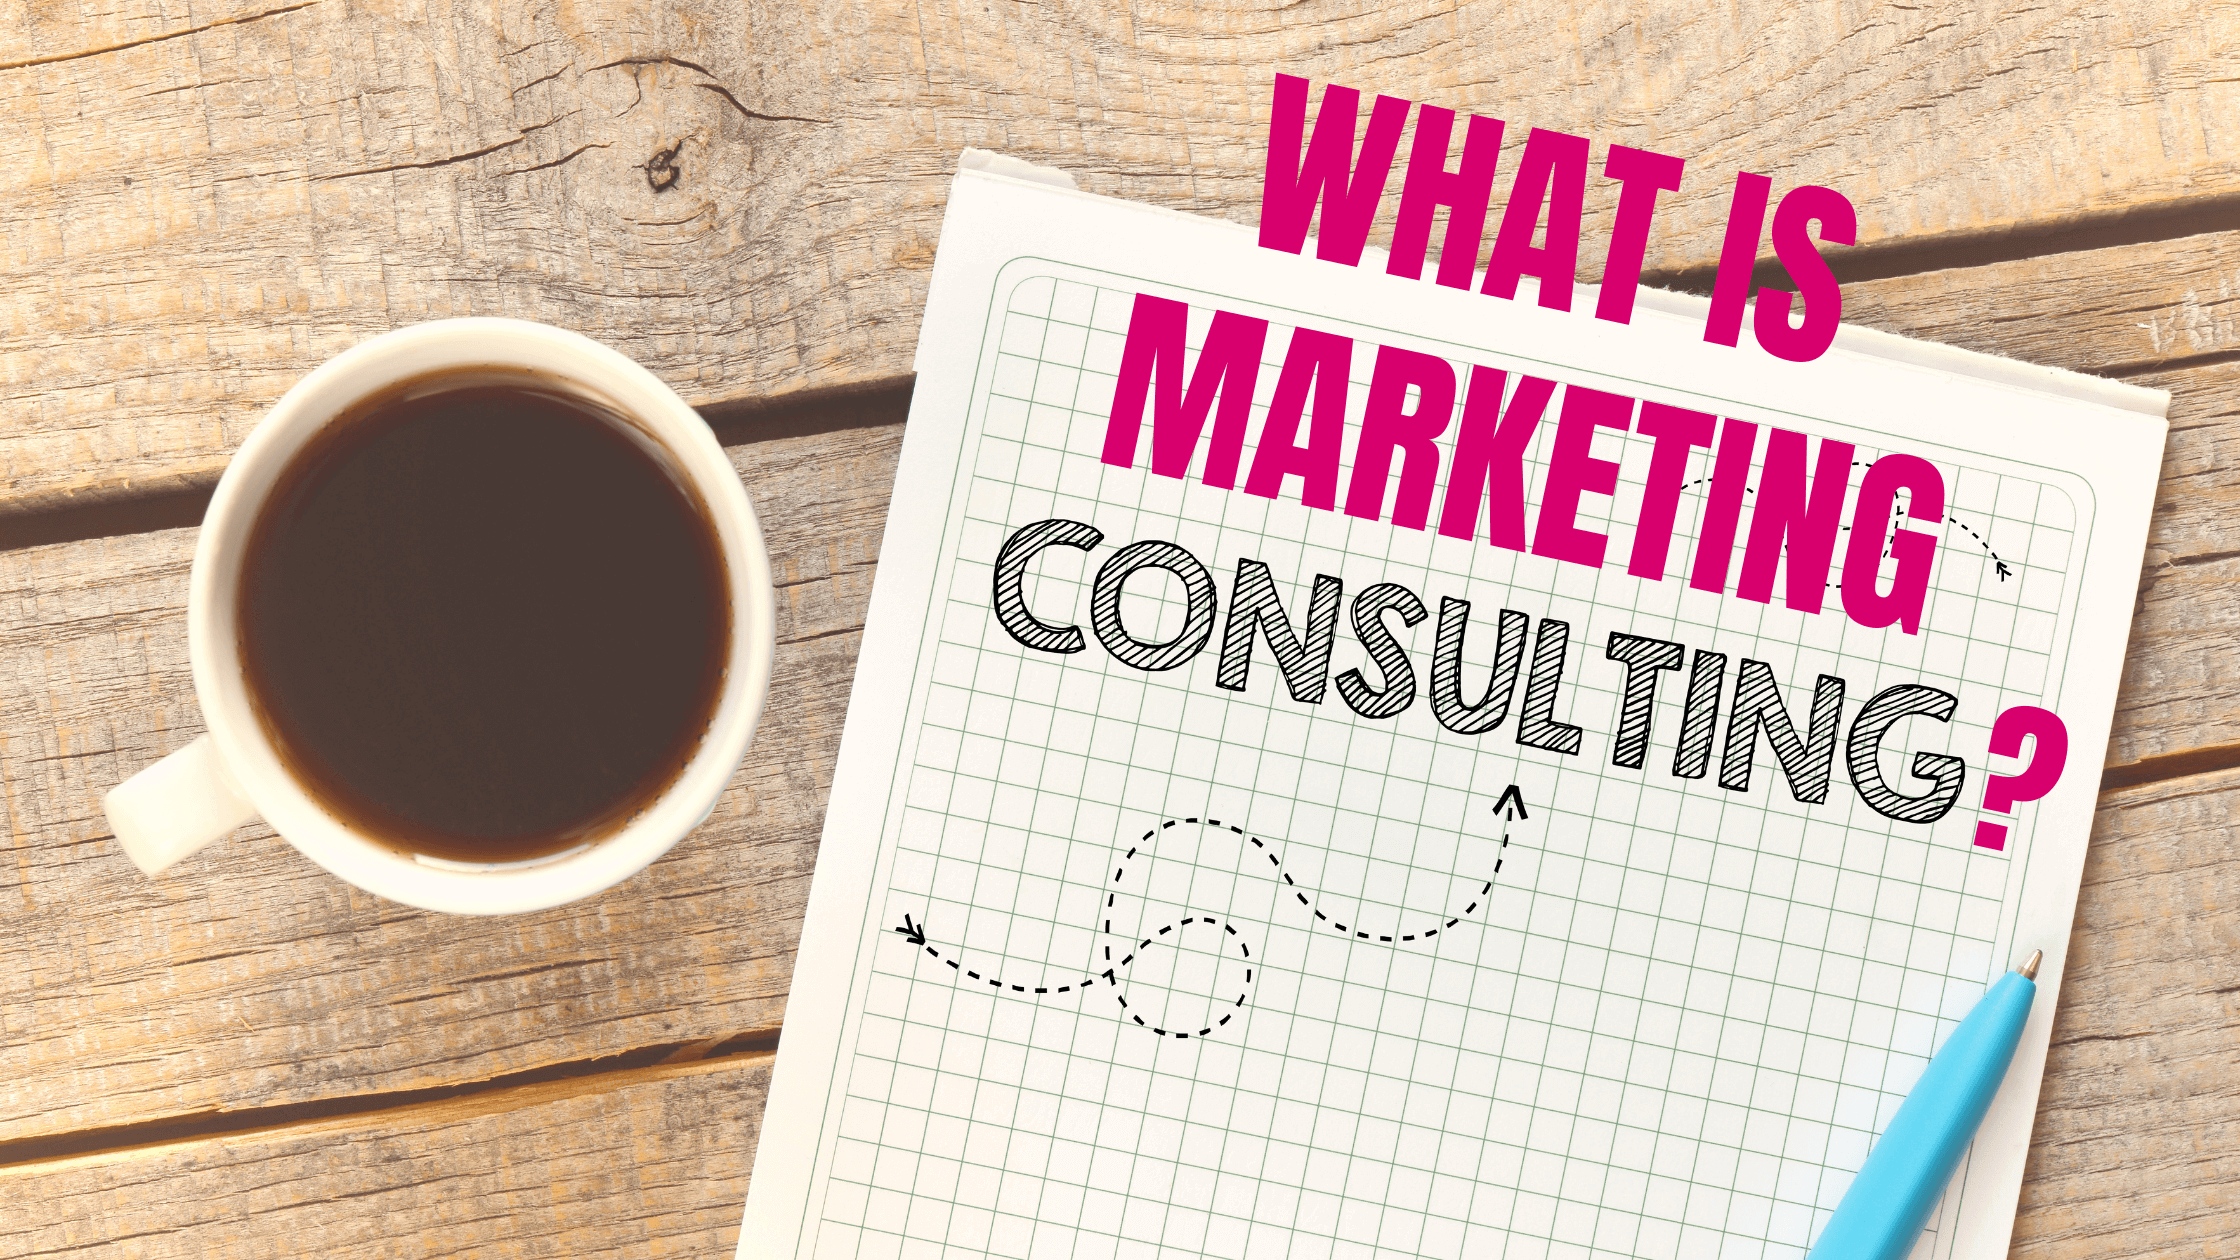 Marketing consulting graphic with coffee